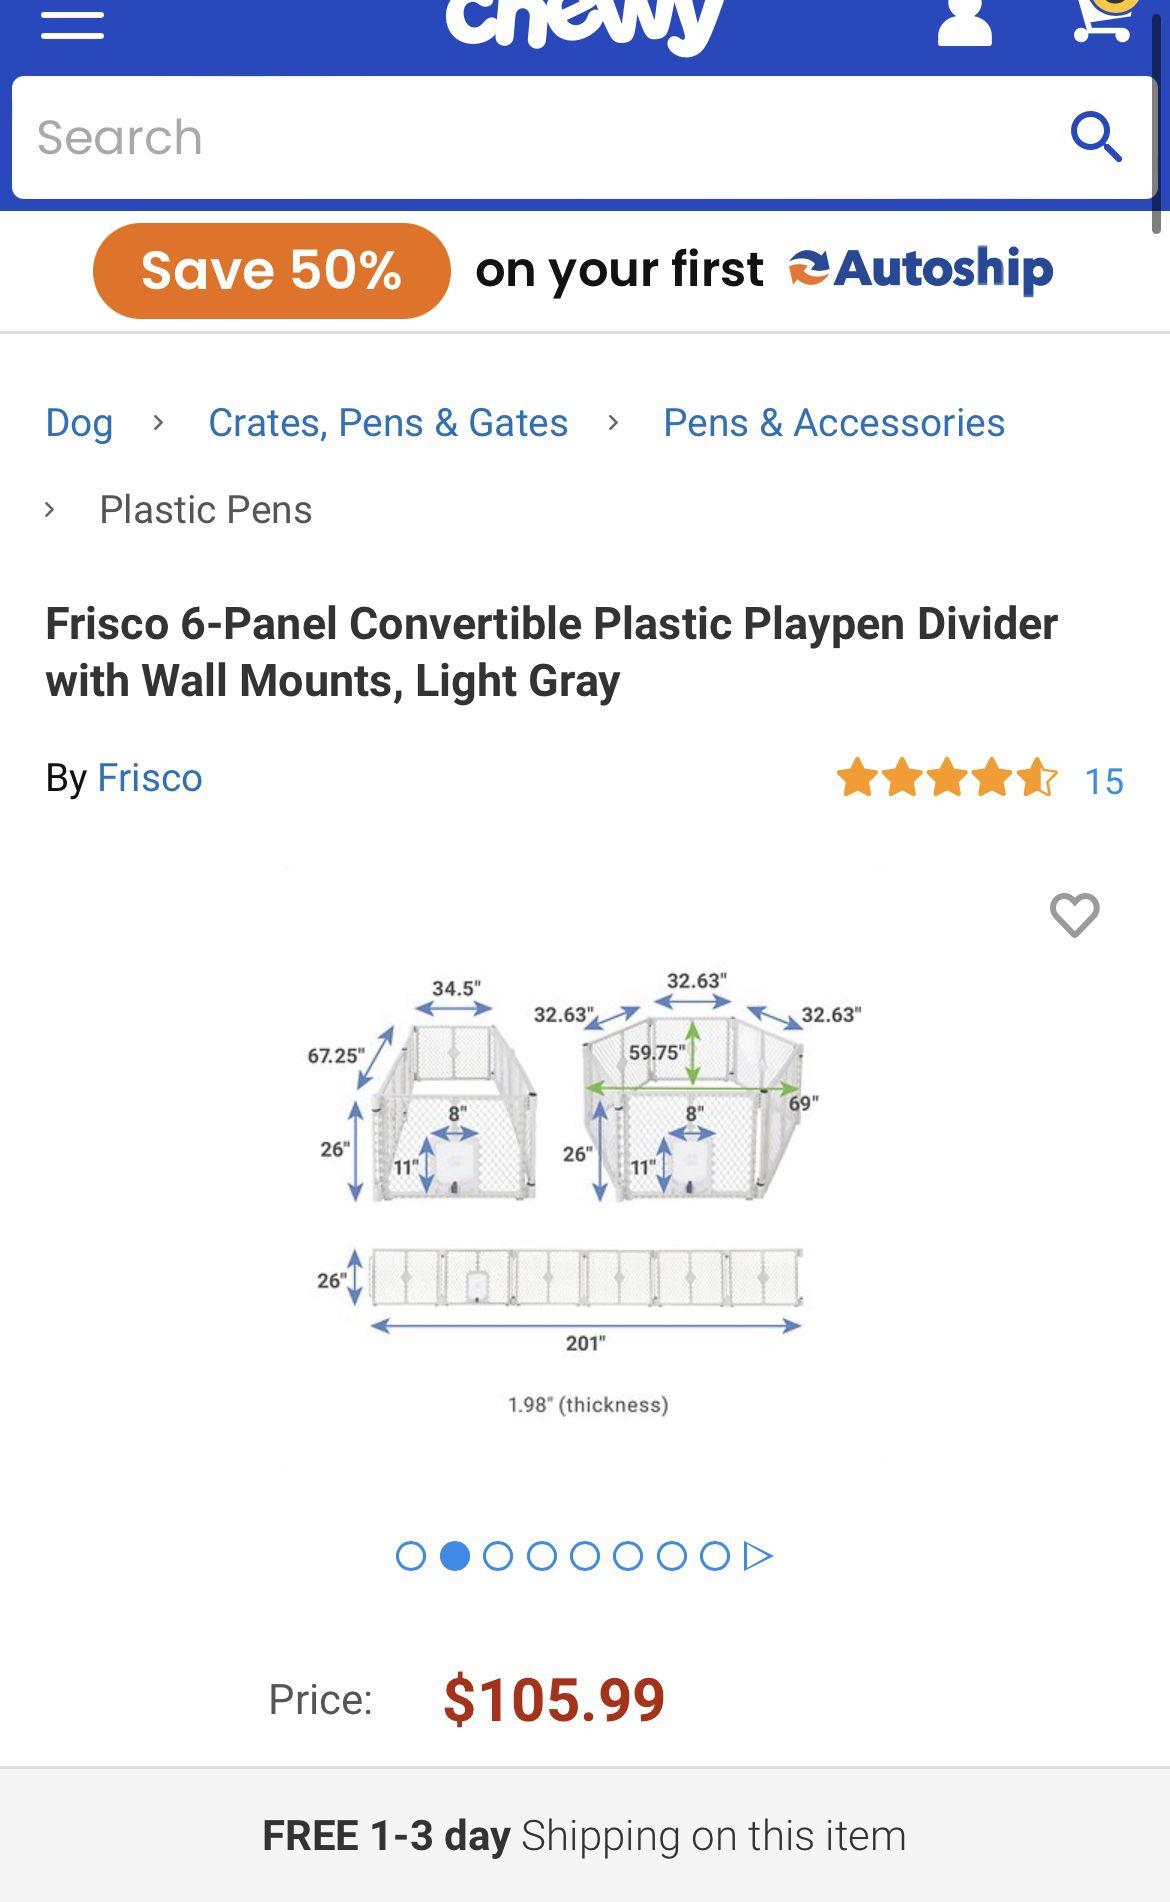 Frisco 6-Panel Convertible Plastic Playpen Divider with Wall Mounts, Light Gray